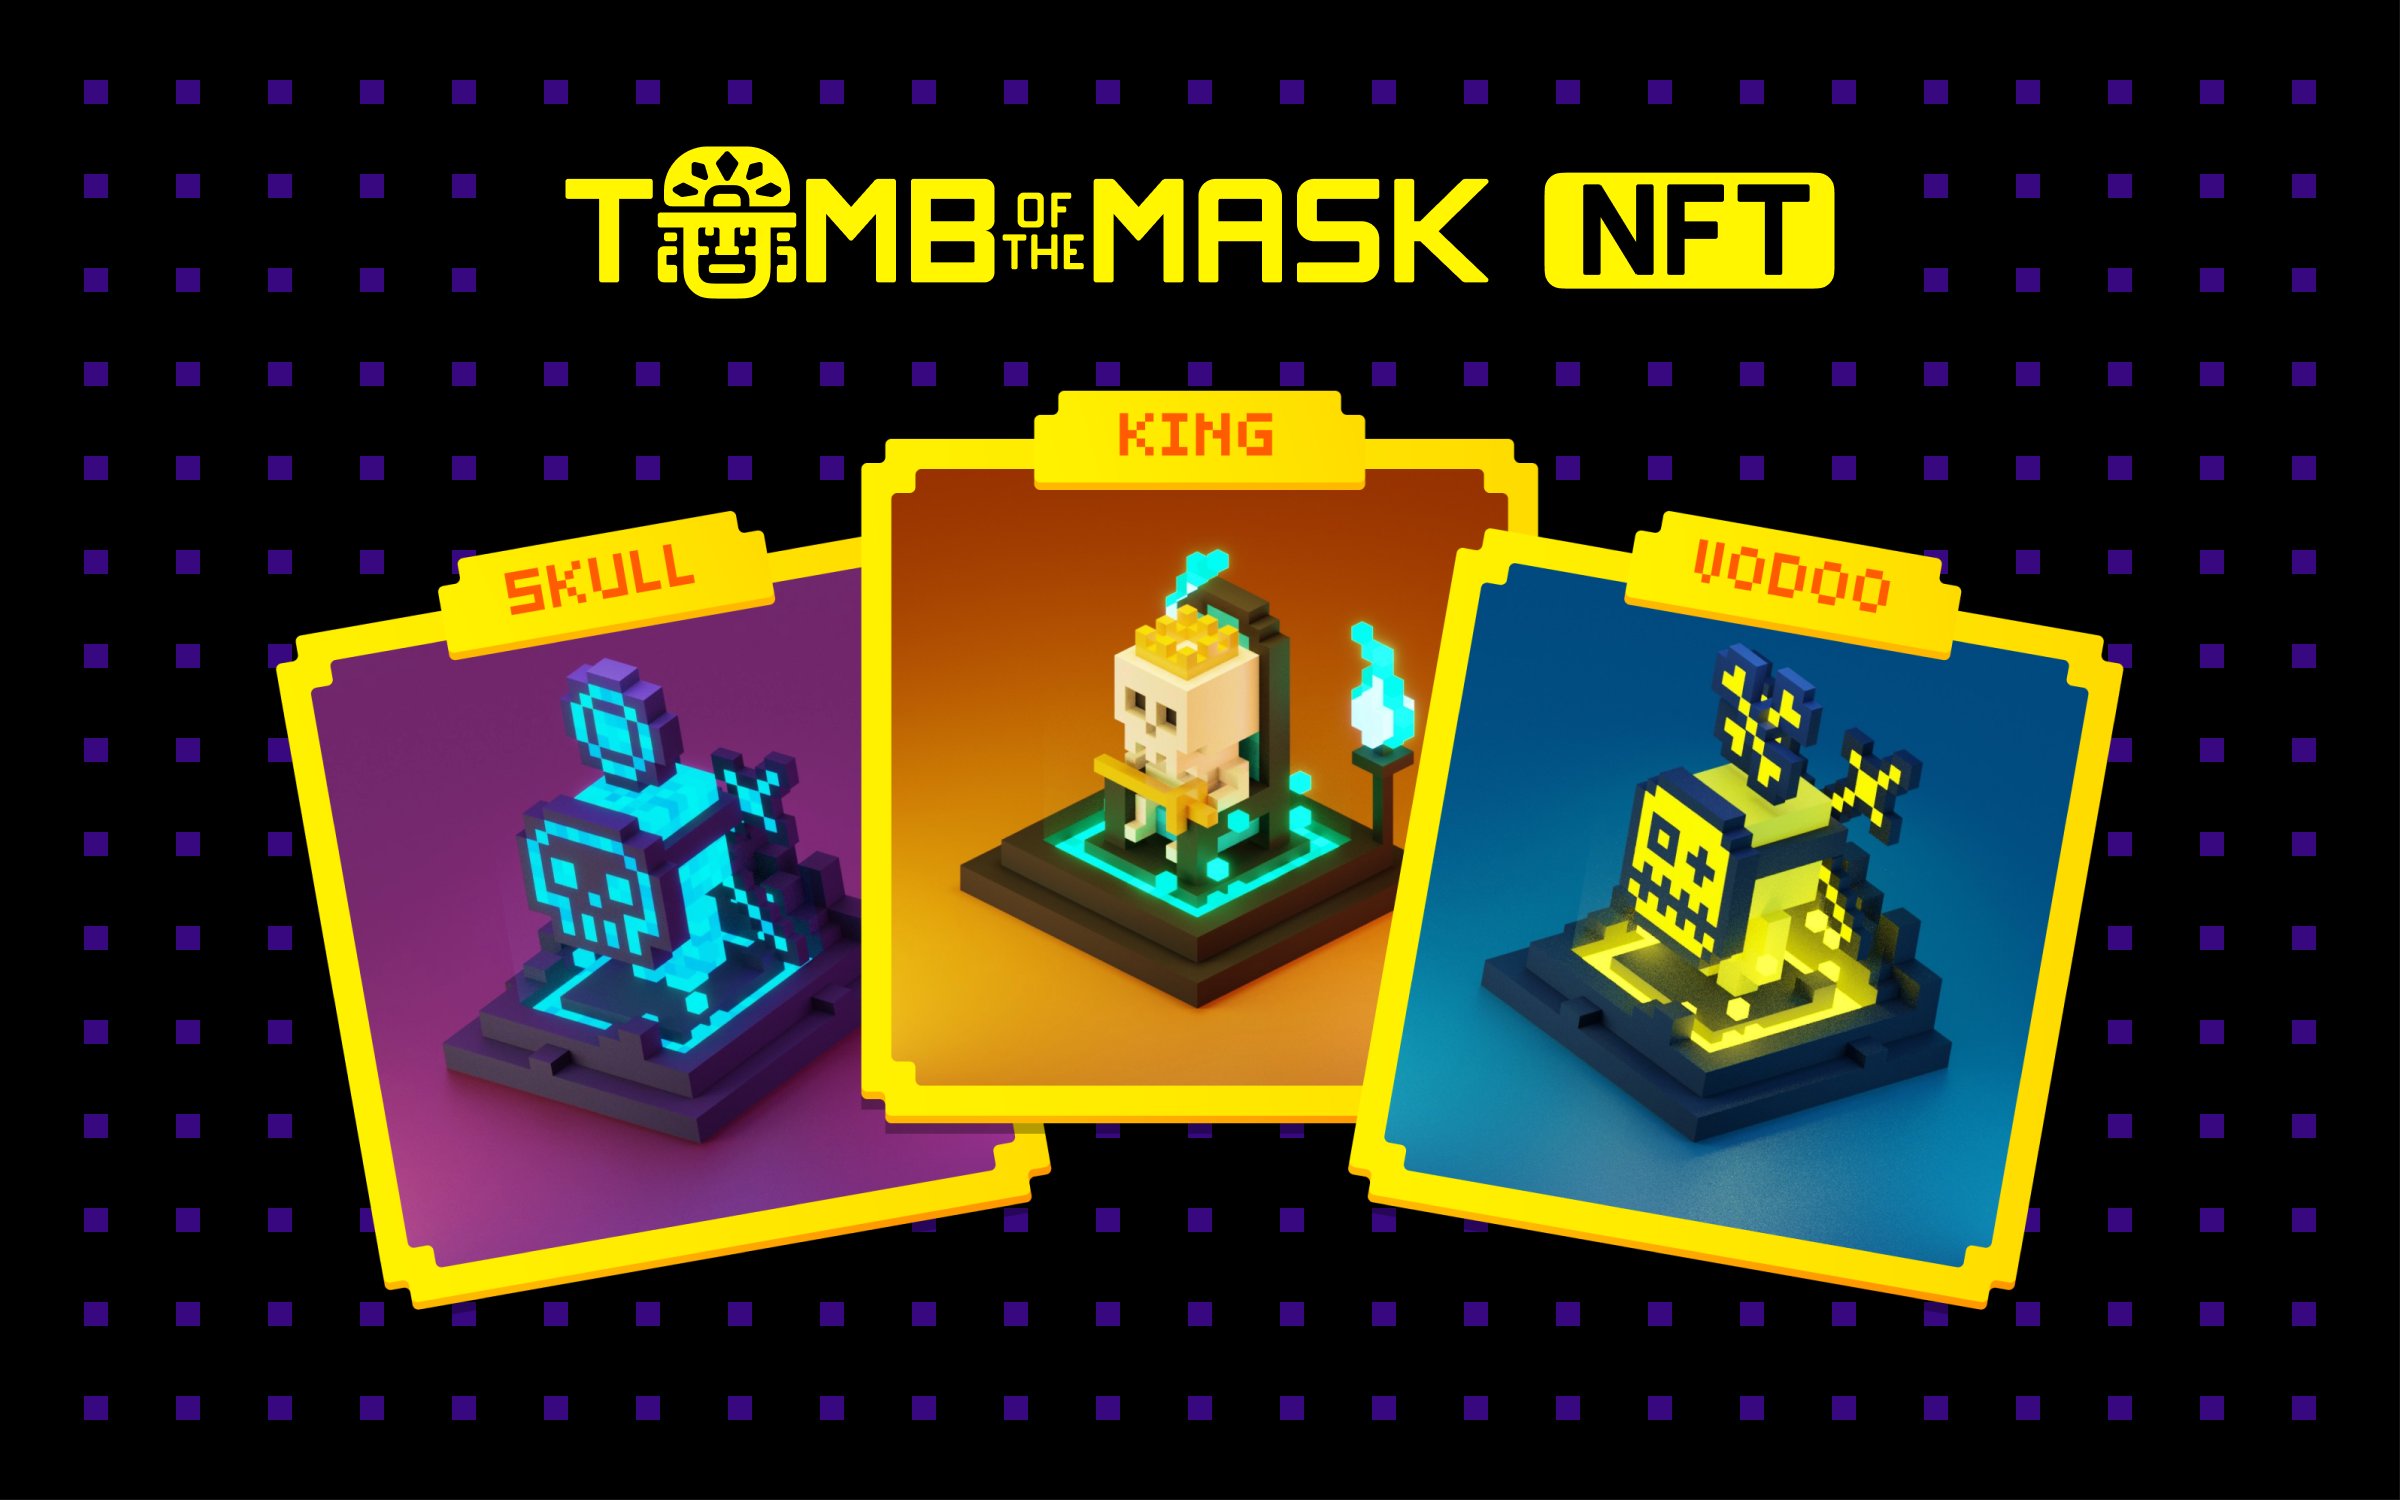 Tomb of the Mask Official (@TotMNFT) / Twitter